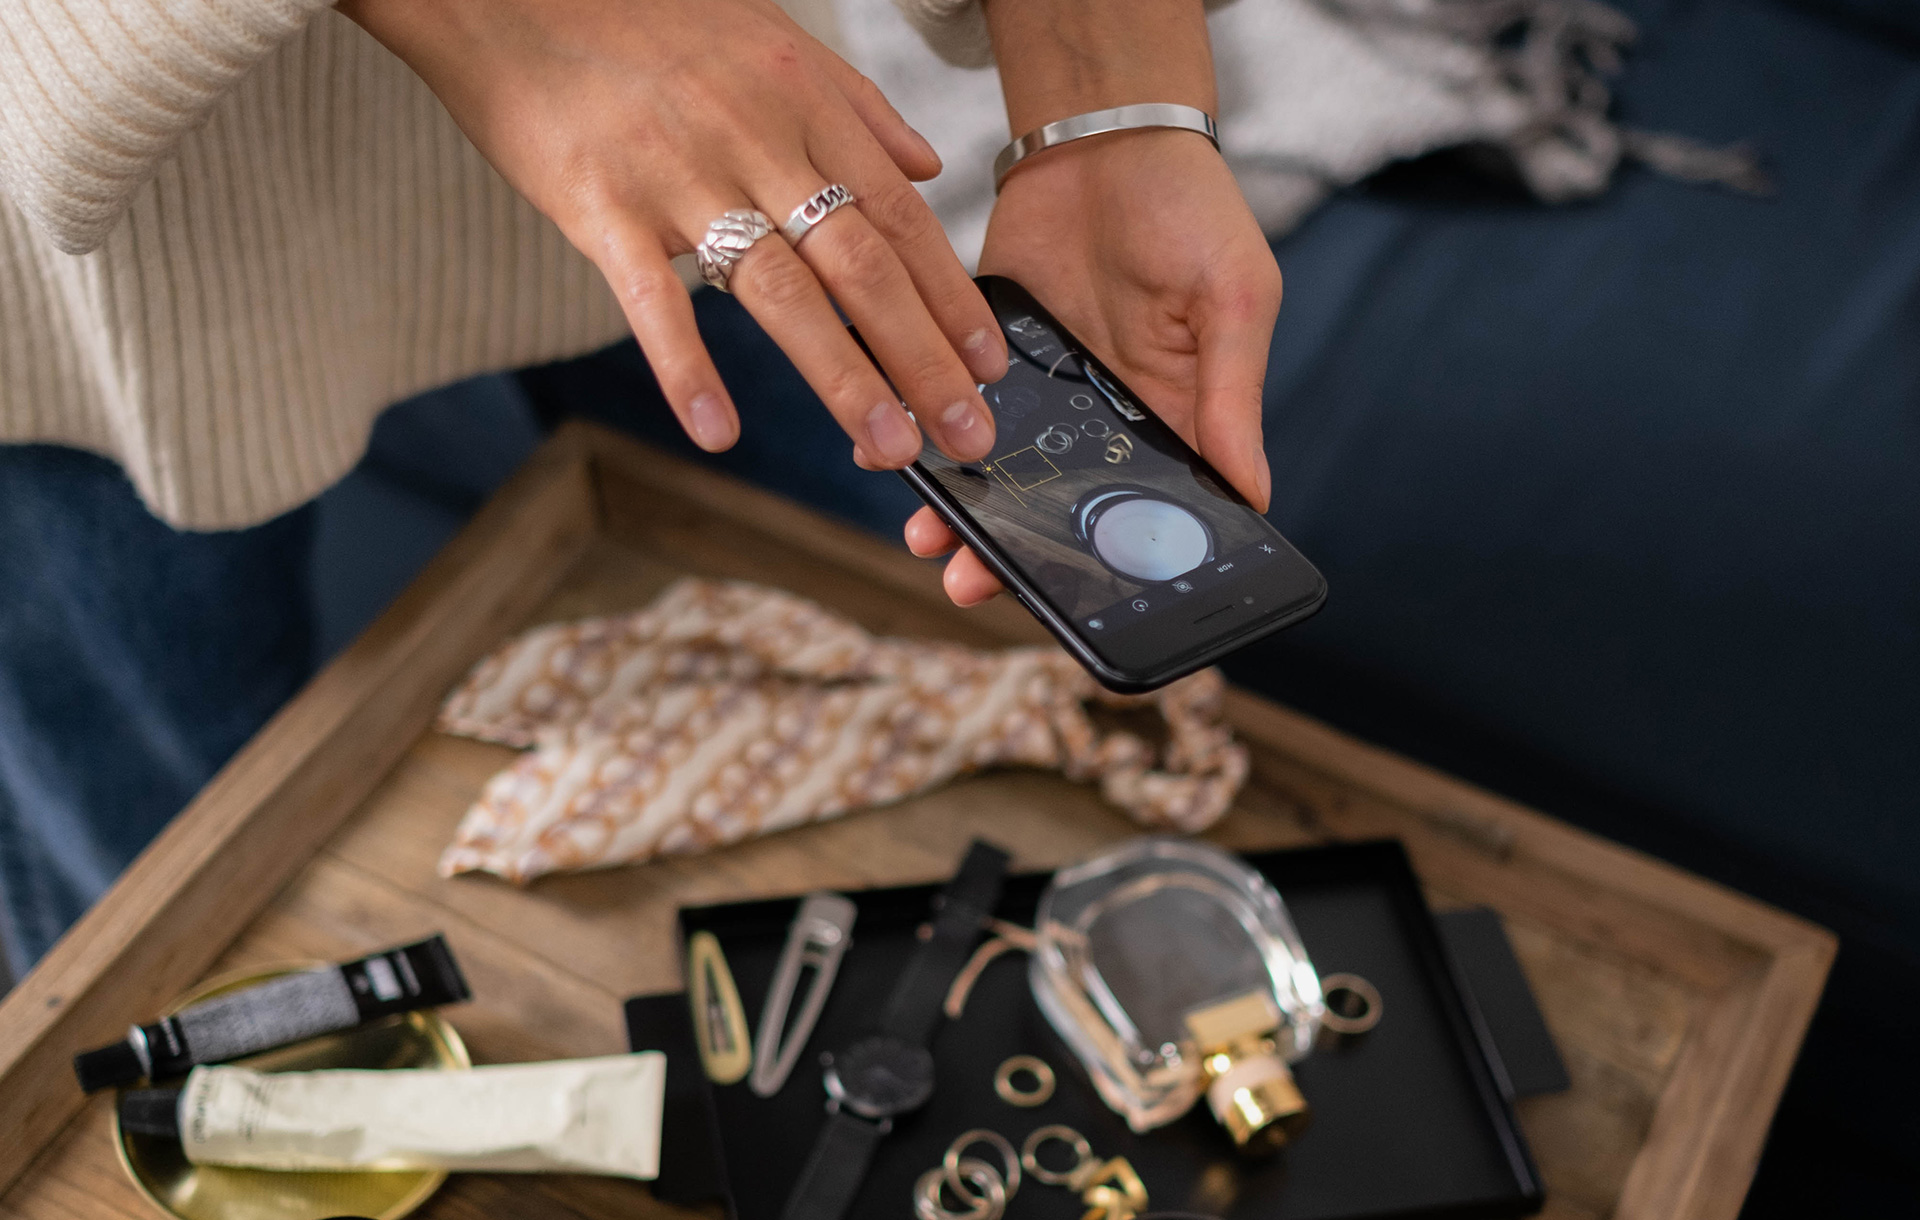 Bespoke Experiences for Online Luxury Customers